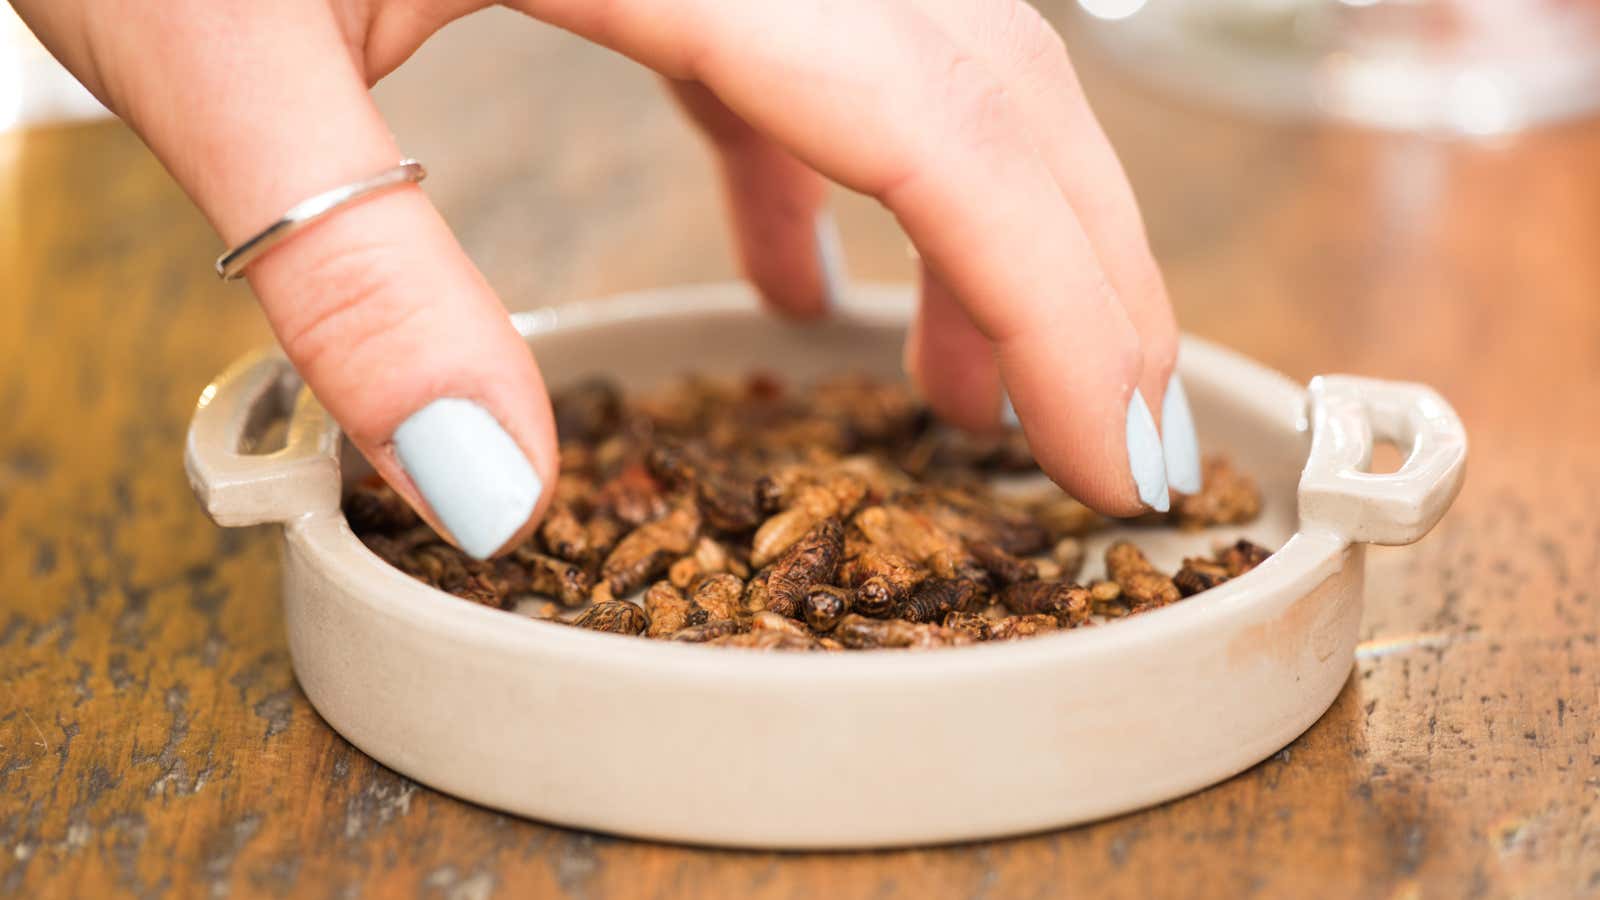 Roasted crickets by edible insect company Eat Grub, which are stocked at British supermarket chain Sainsbury’s, are seen in this handout photo by Eat Grub. (NO ARCHIVE / NO SALES)